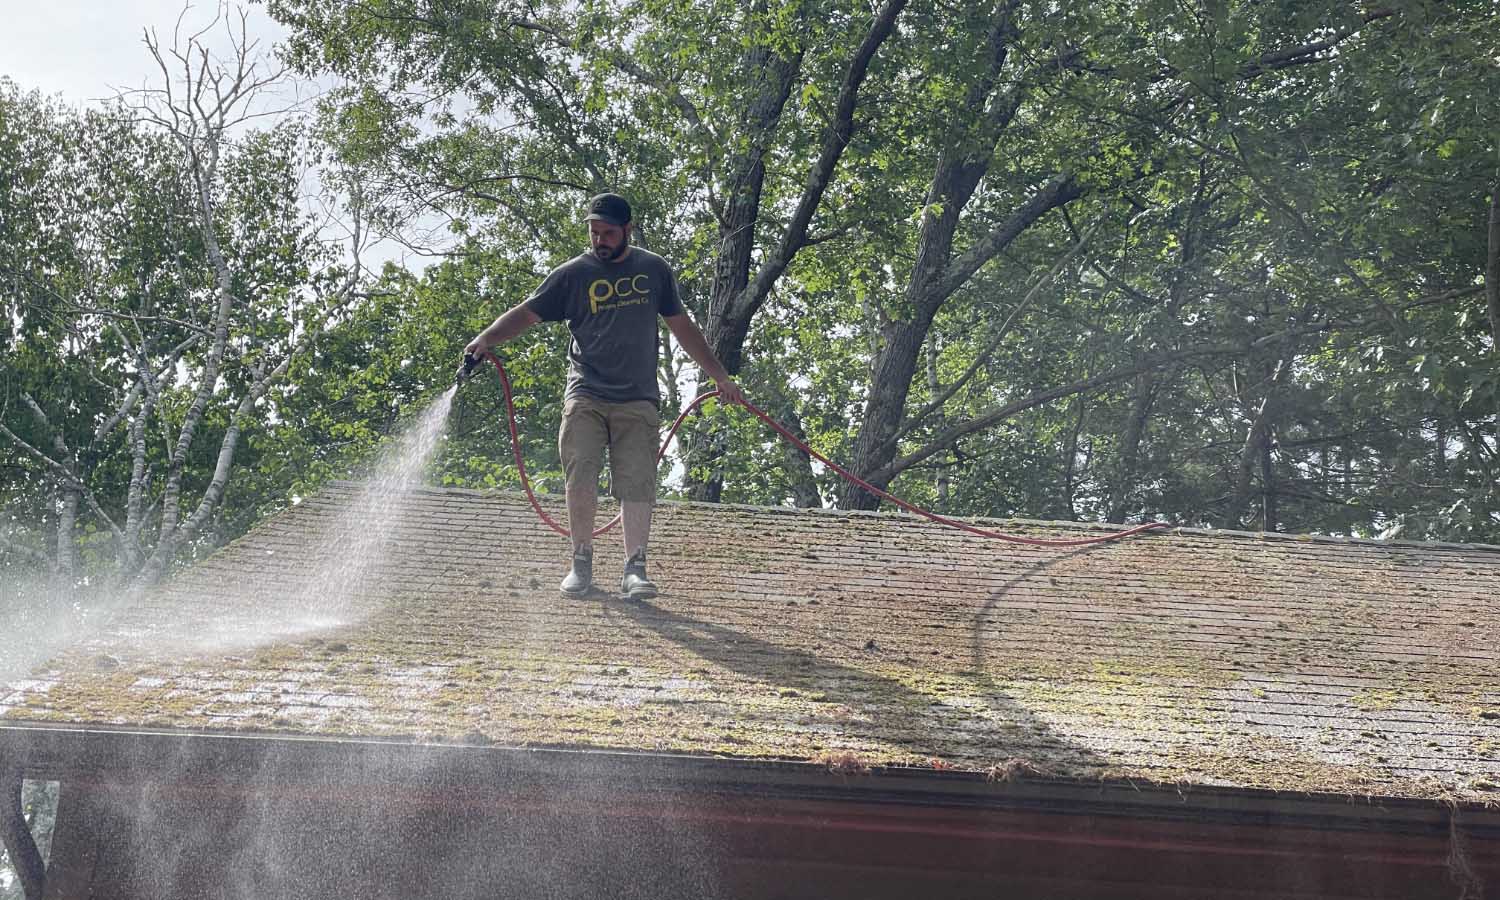 Roof Washing Services